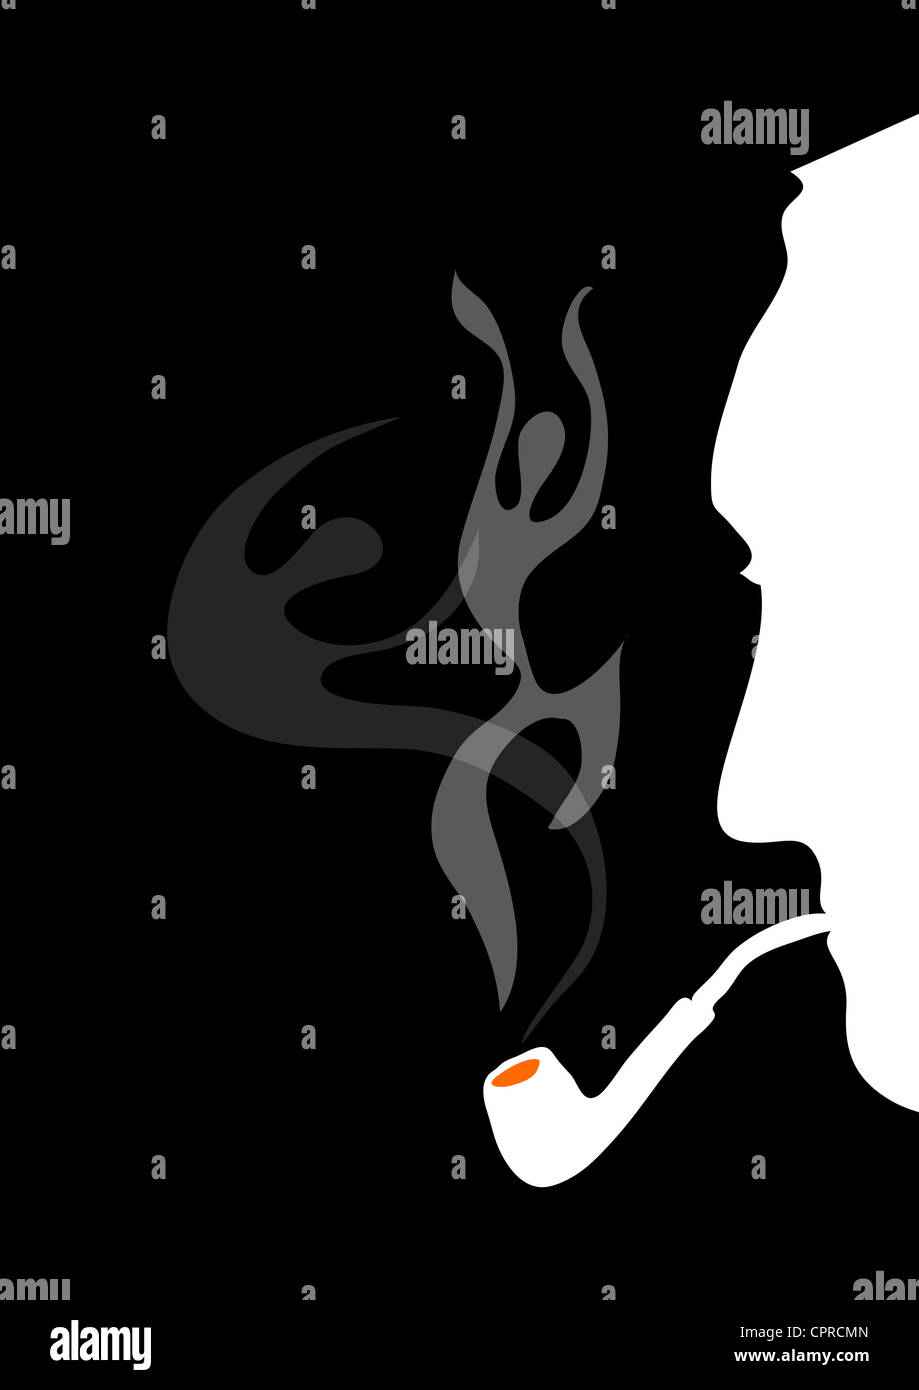 Silhouette of a detective smoking a pipe. Stock Photo